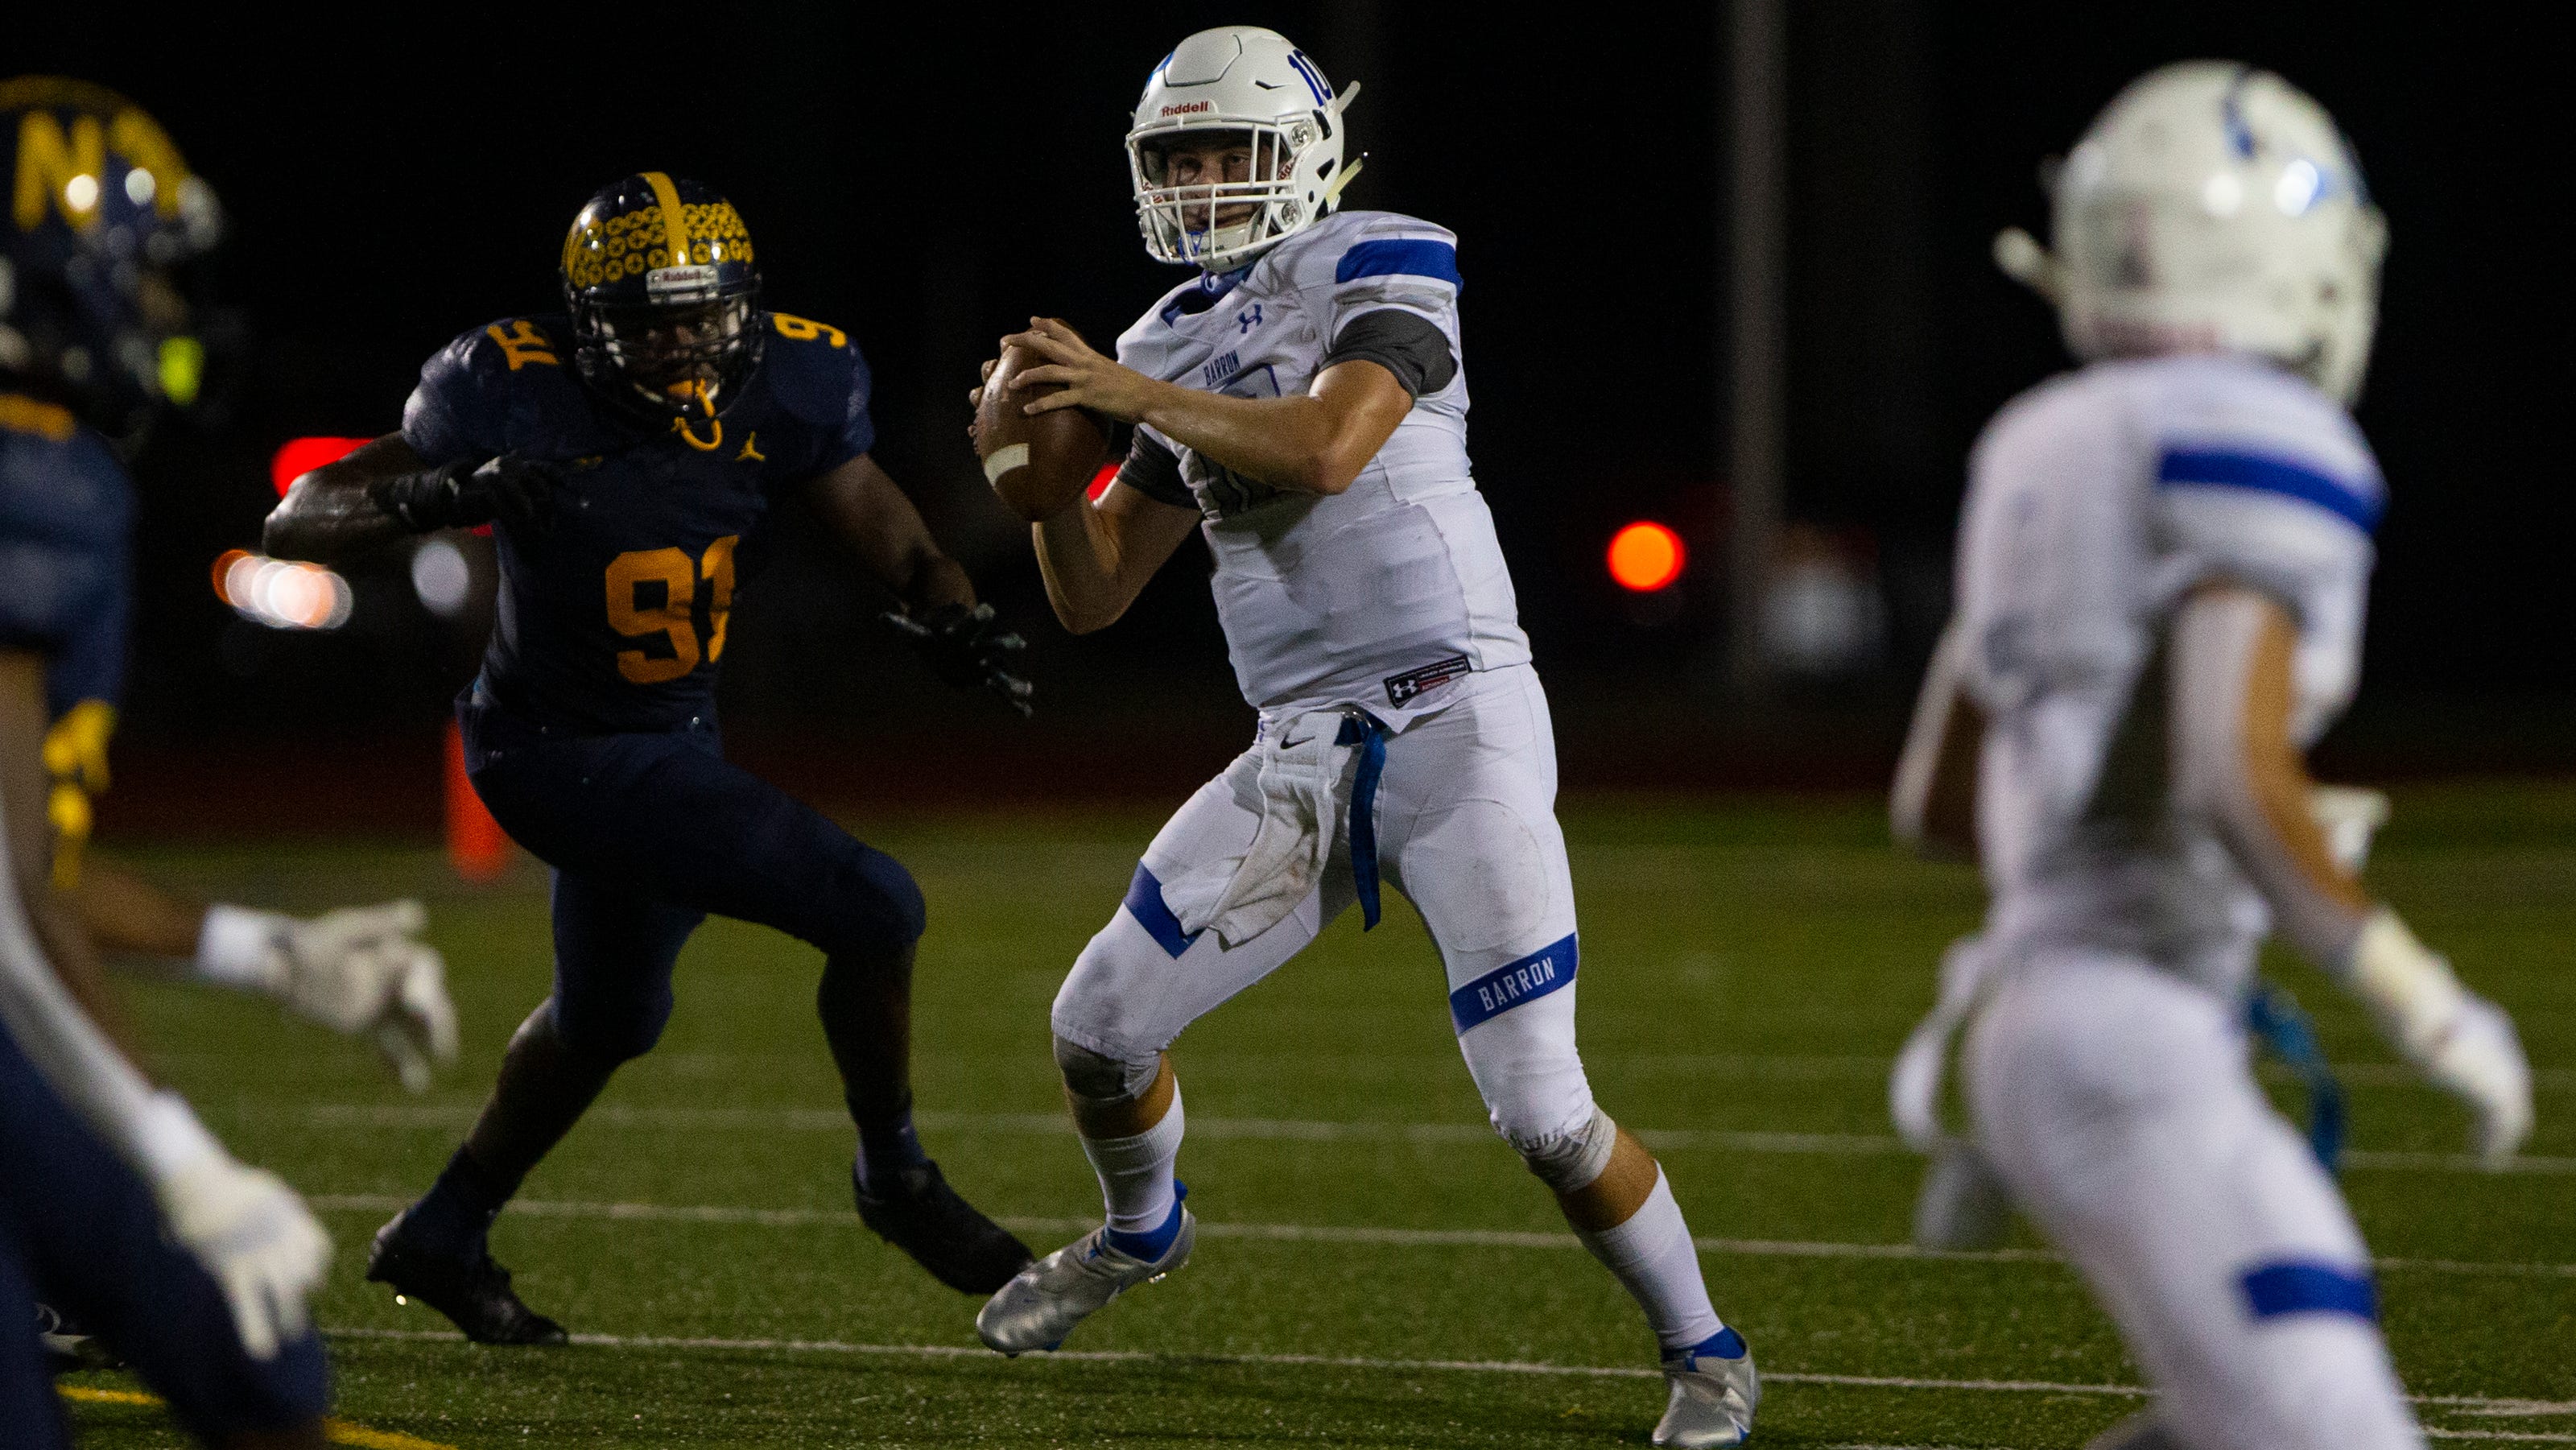 The News Press/Naples Daily News previews Week 8 games in Naples Fort